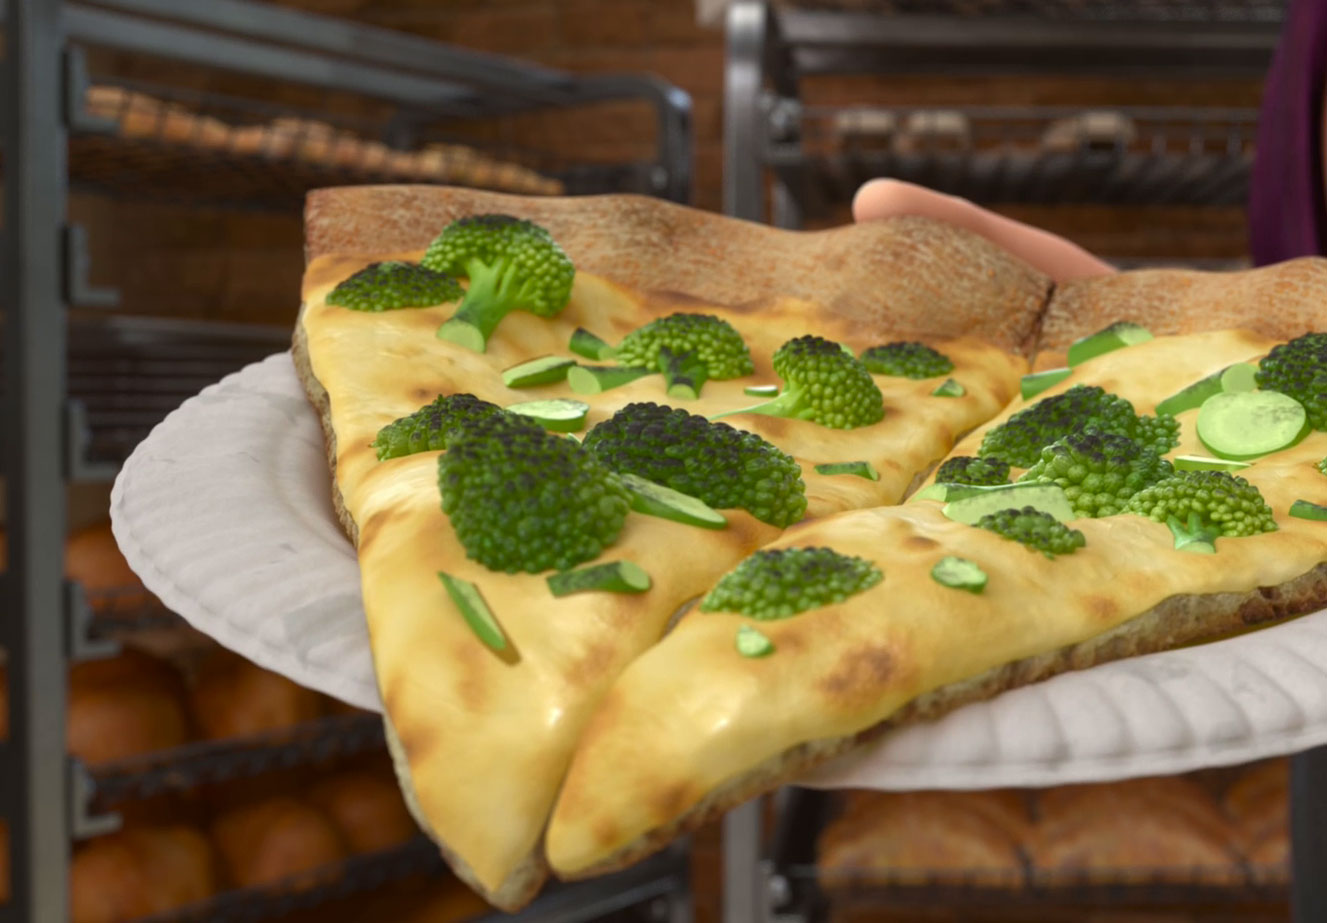 Can You Name at Least 12/15 of These Disney Movies from Just the Food? Disney Food   Broccoli Pizza